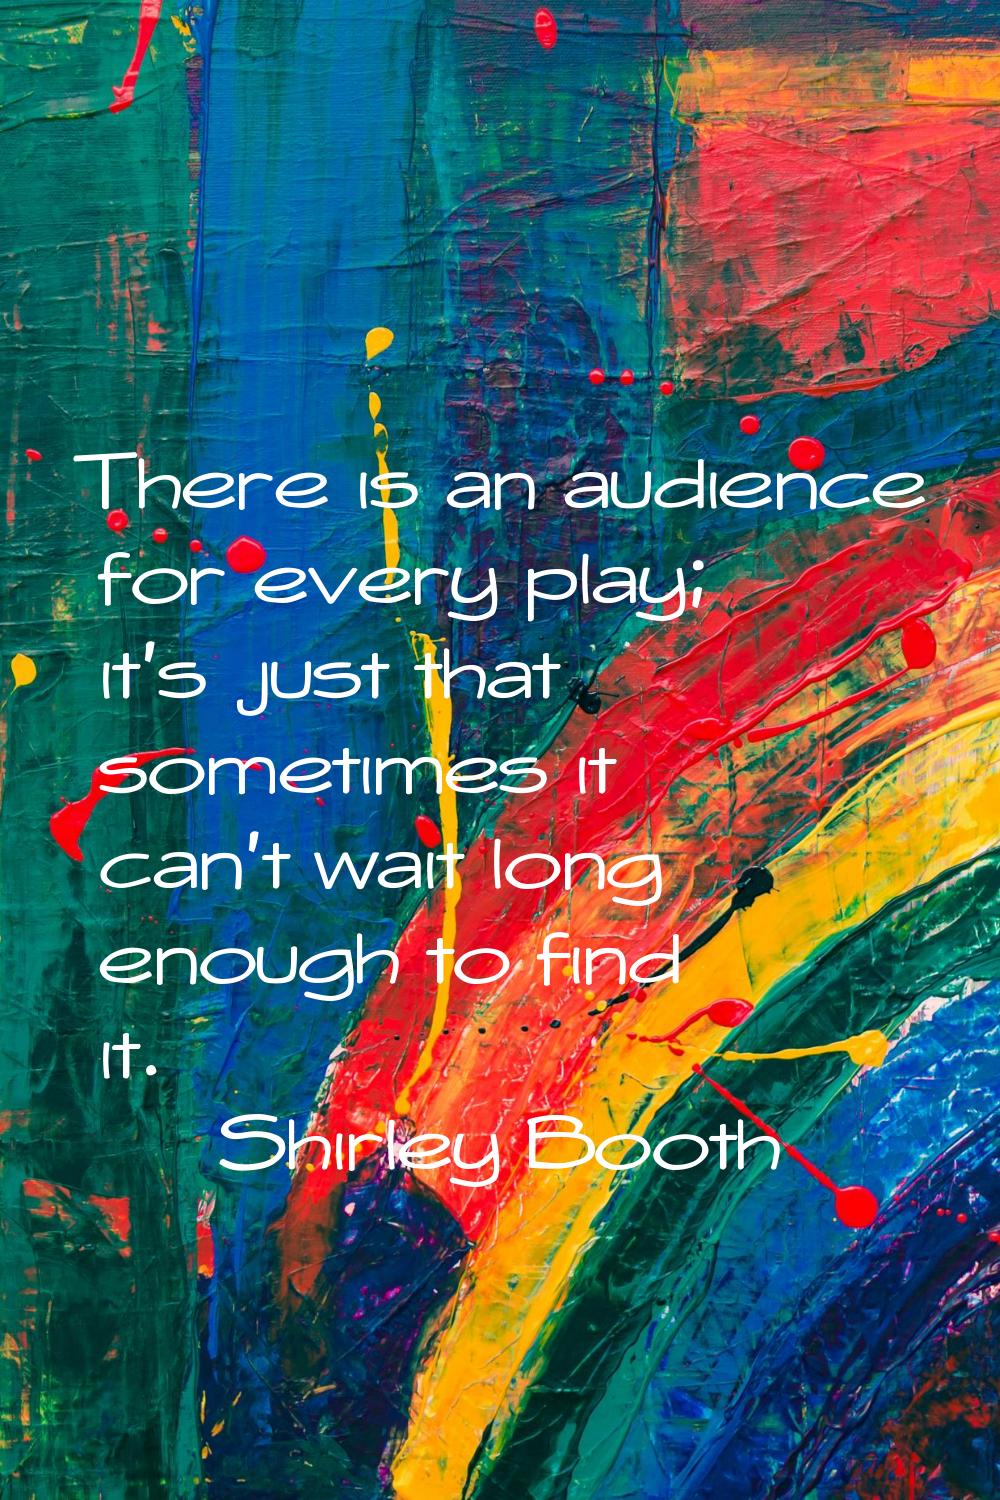 There is an audience for every play; it's just that sometimes it can't wait long enough to find it.